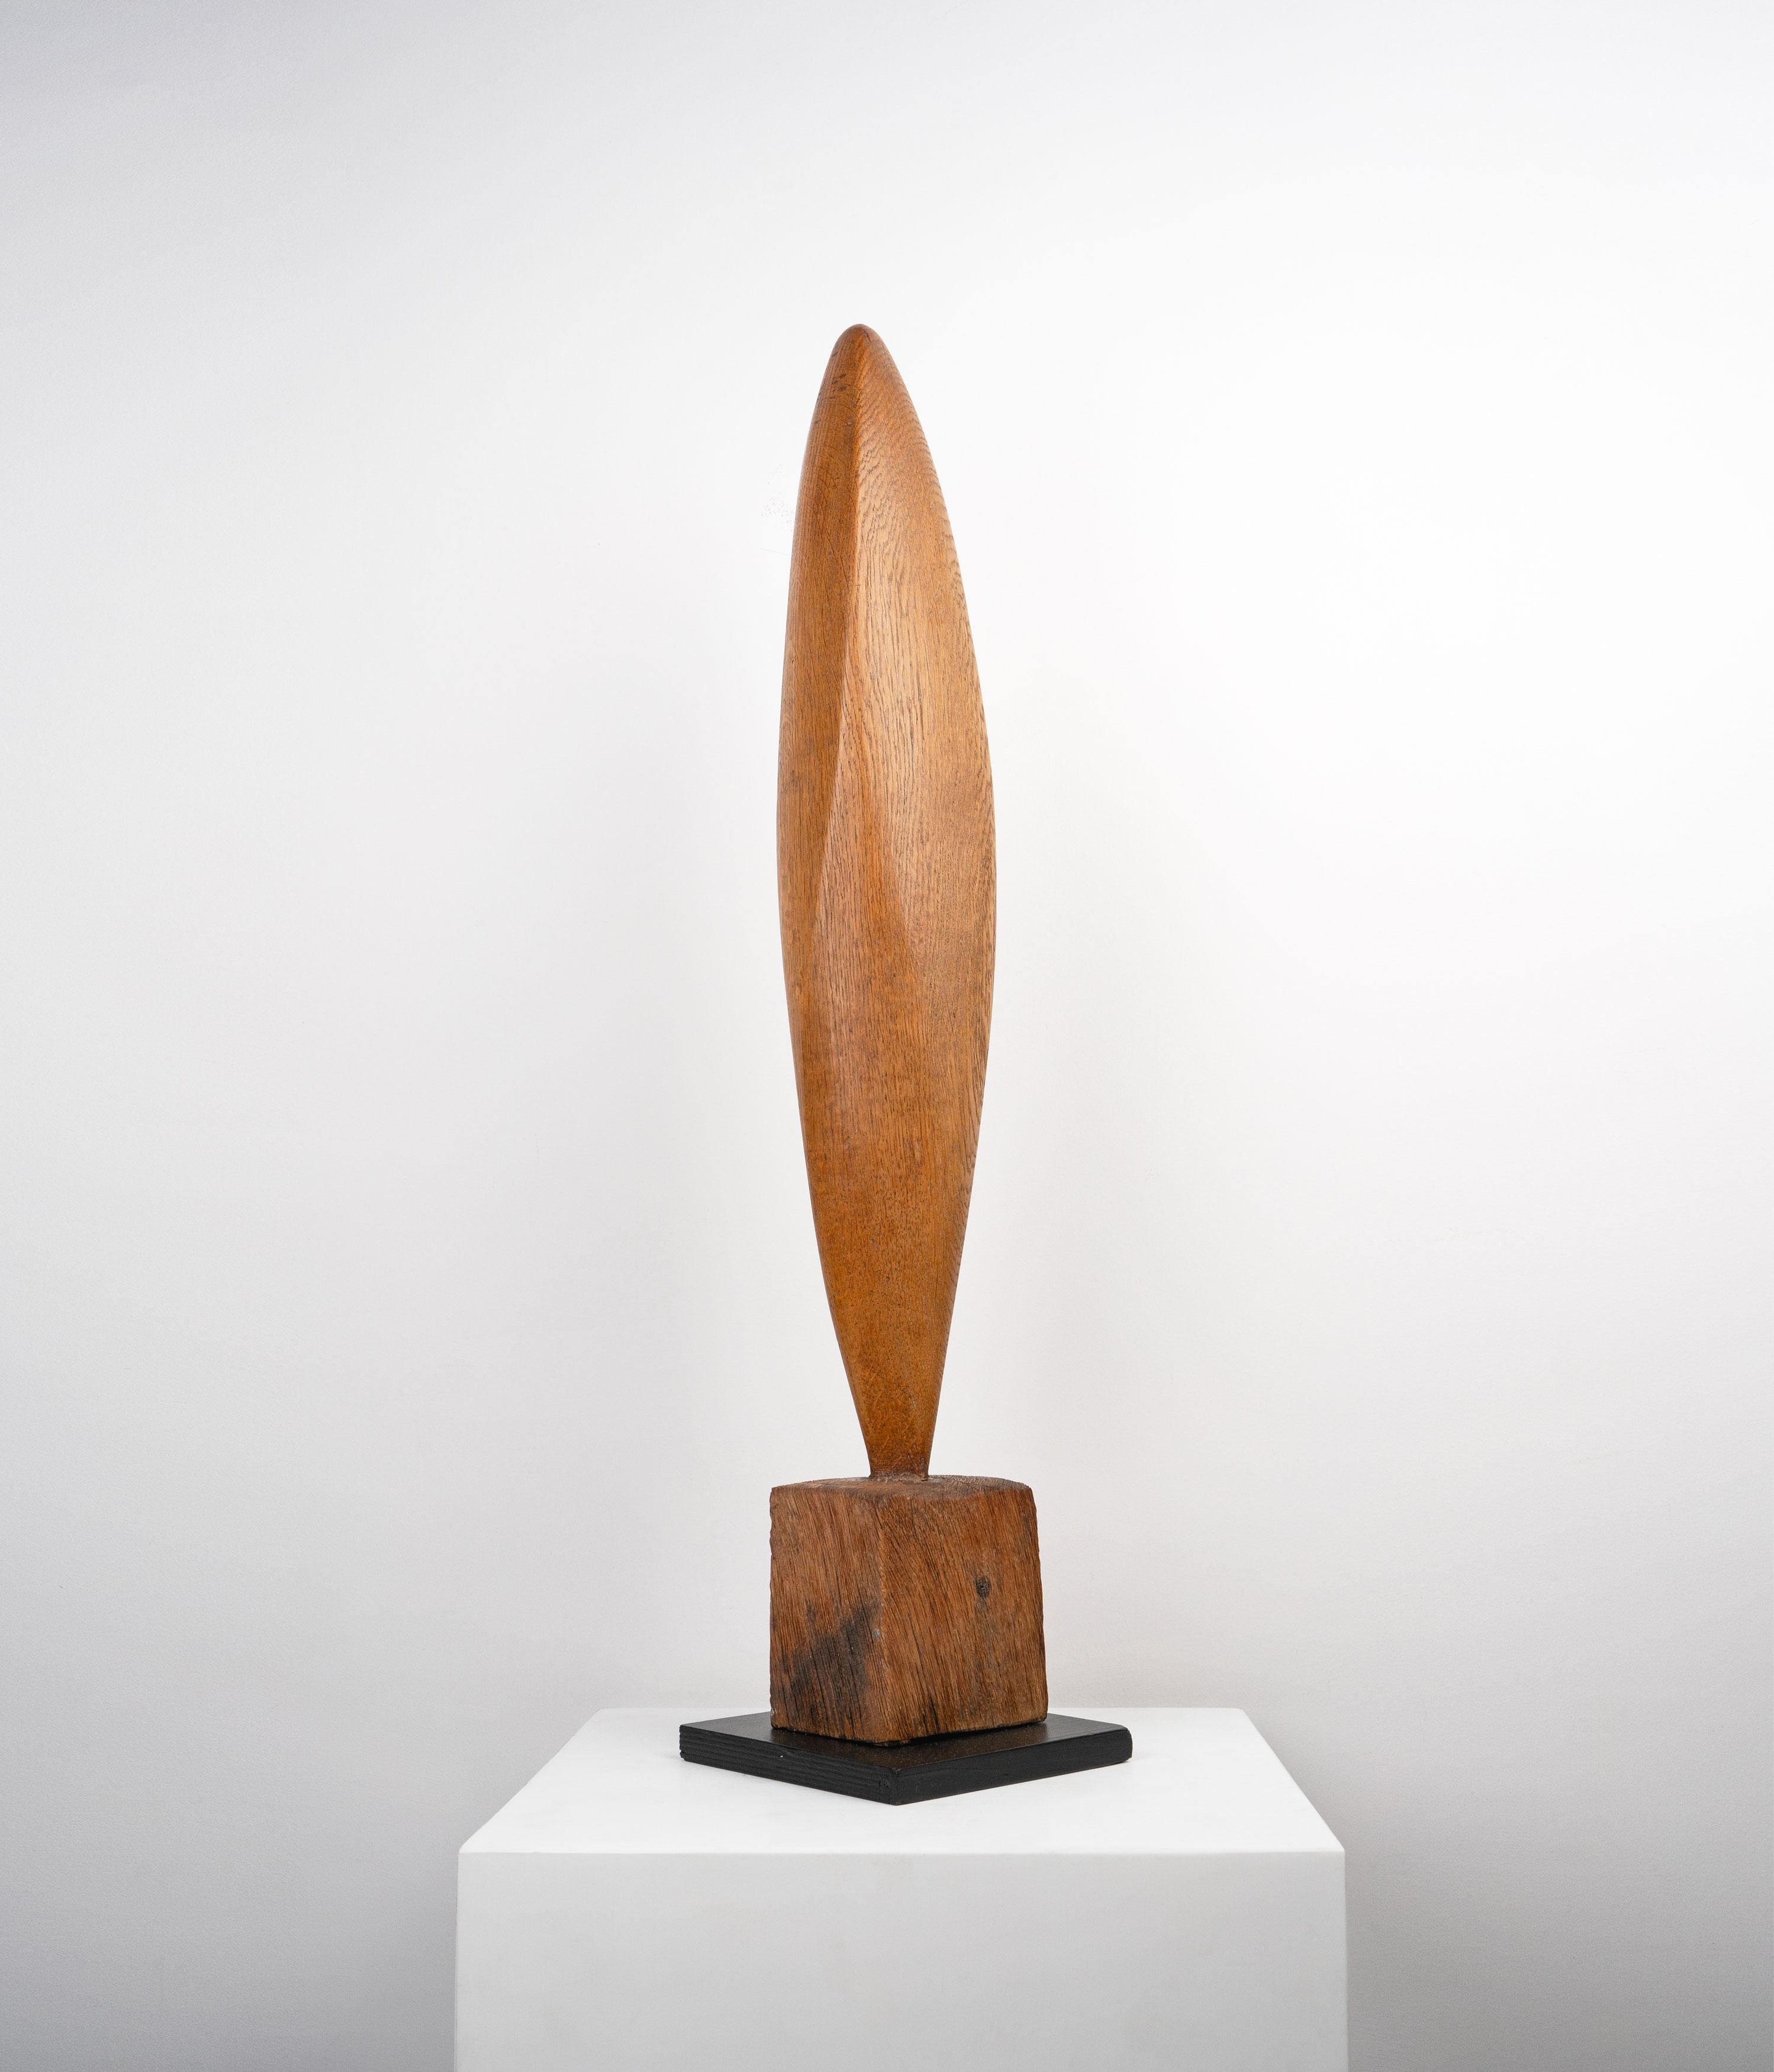 A large mid 20th Century abstract sculpture carved from oak.

Dimensions (cm, approx):
Height: 82
Width: 17
Depth: 17
